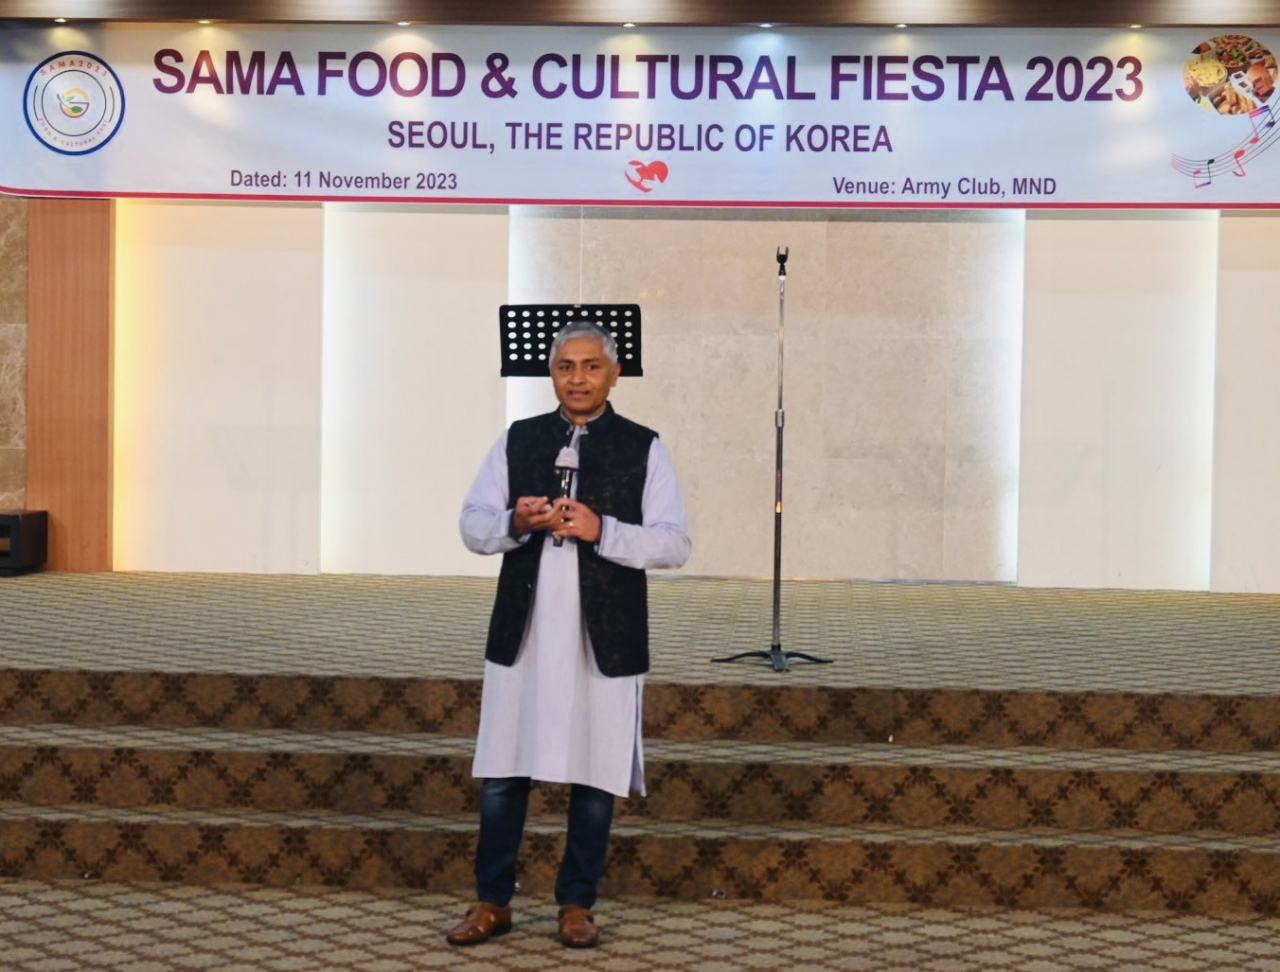 Brig. Gen. Shamim Islam of the Bangladesh Air Force, head of an association of foreign attaches in Korea delivers welcome remarks at the SAMA Food & Cultural Fiesta 2023 at Army Club in Yongsan-gu, Seoul on Saturday. (Sanjay Kumar/The Korea Herald)